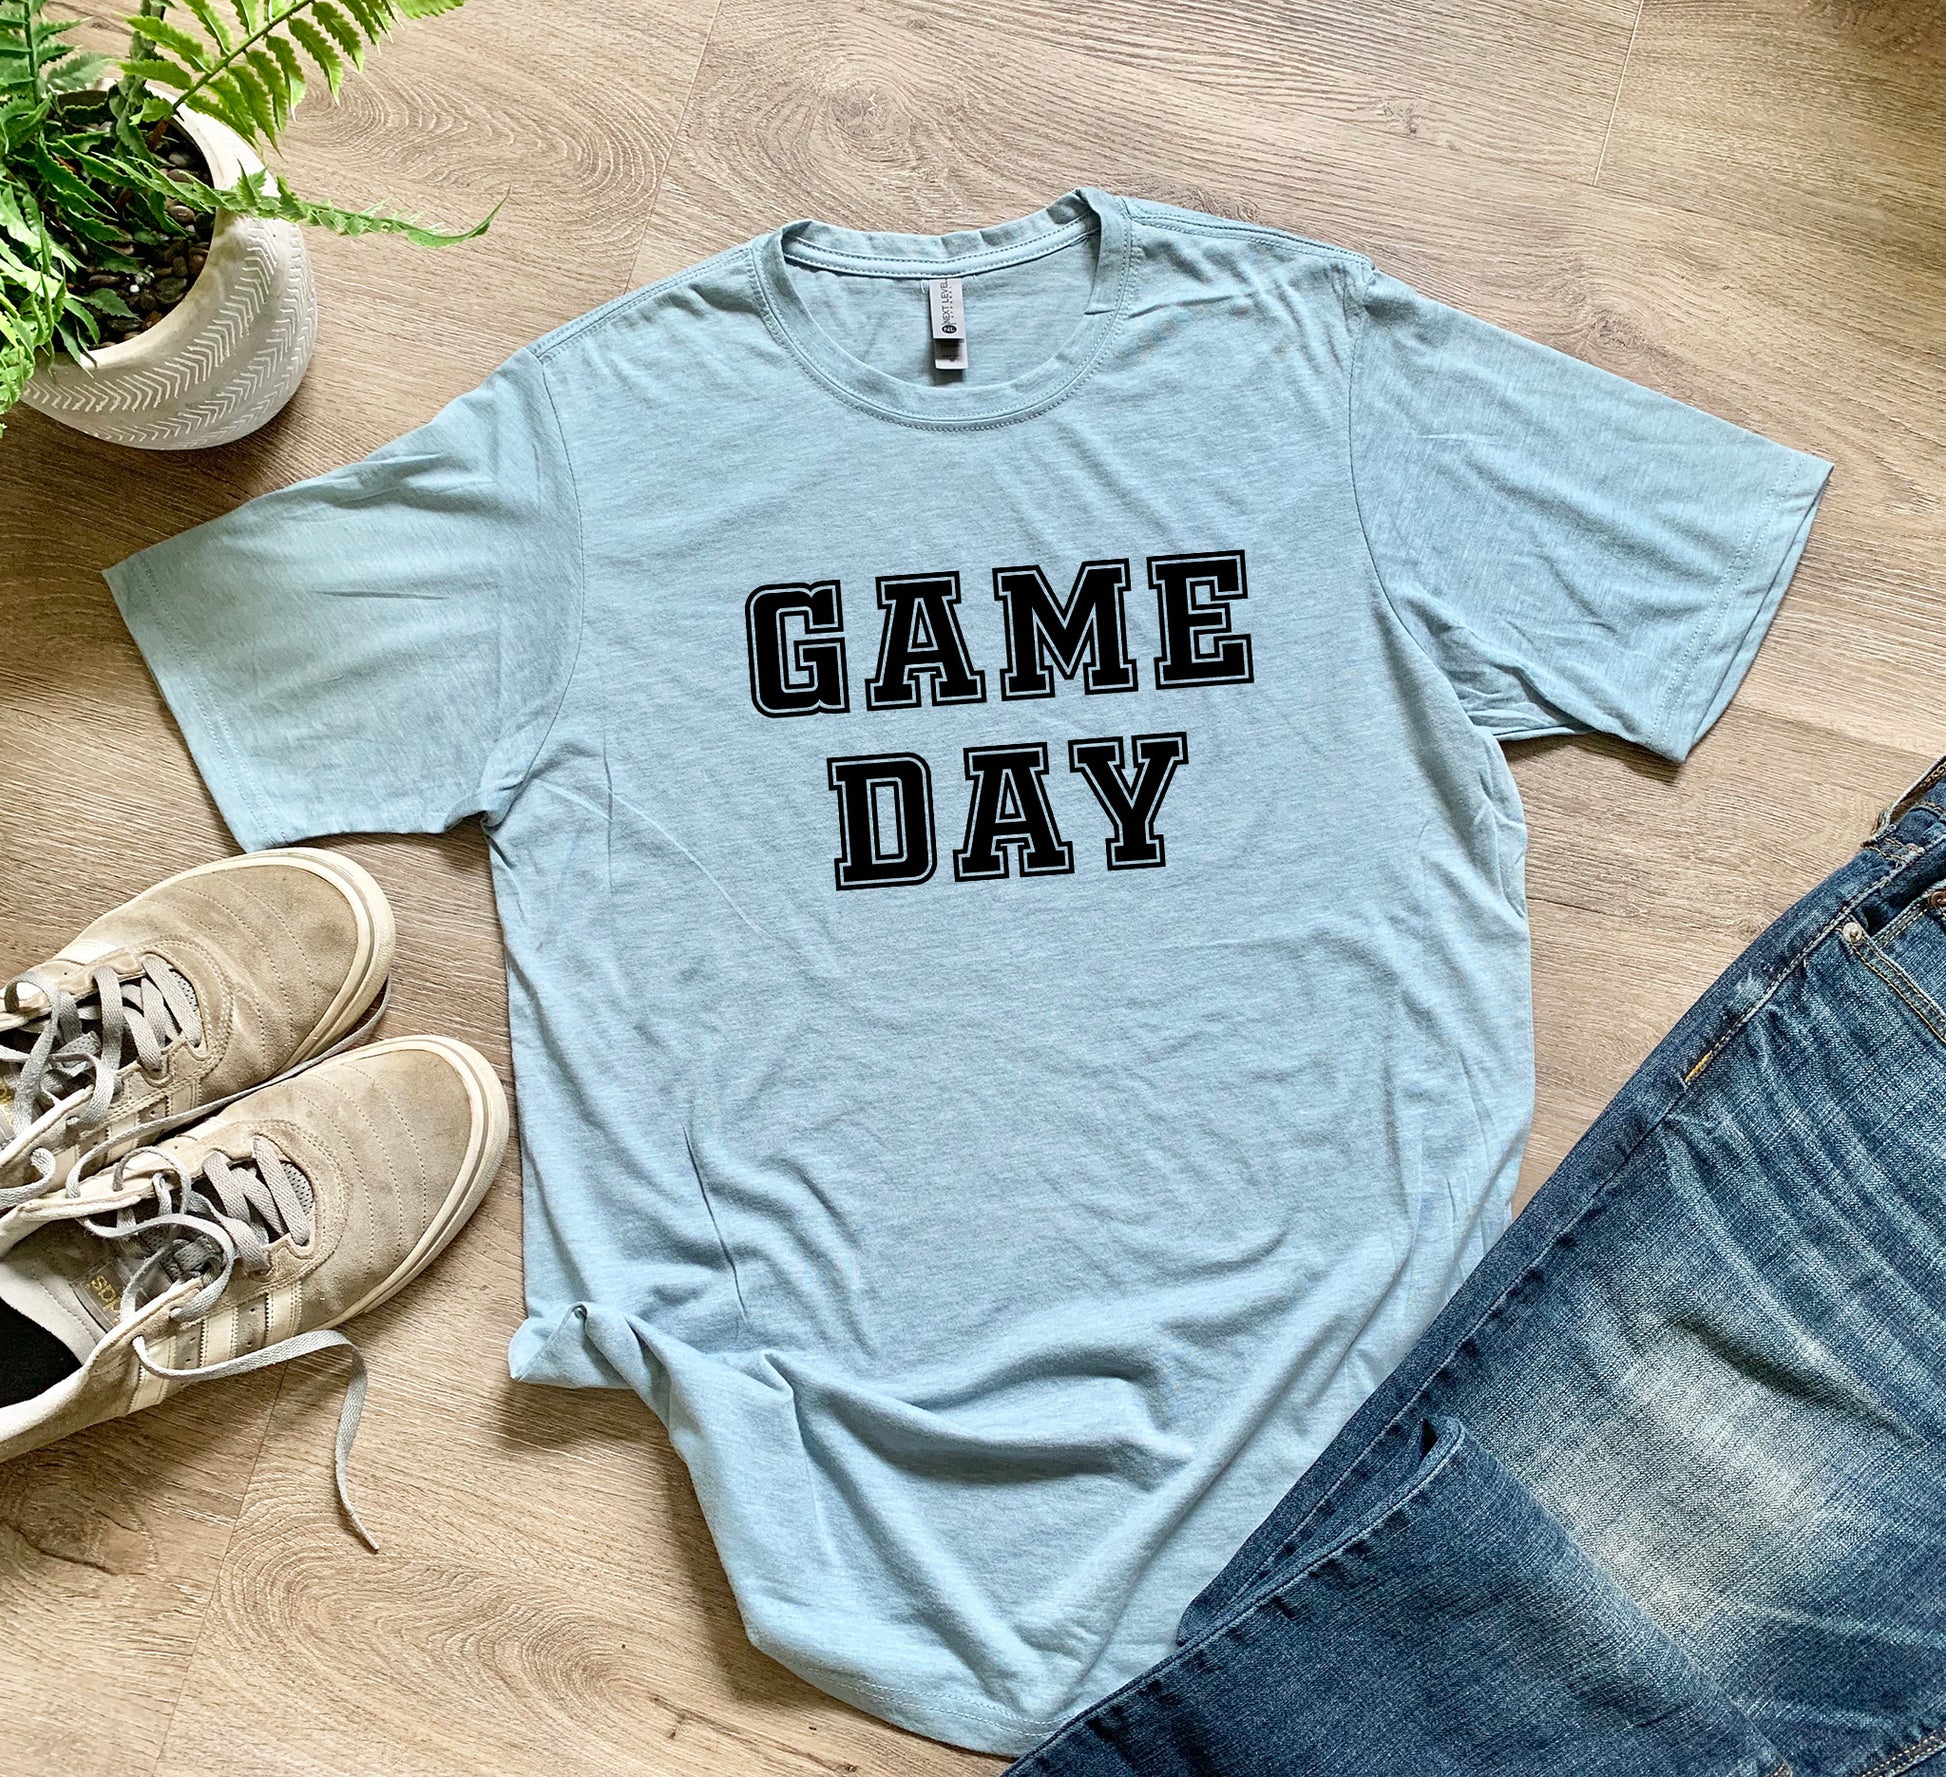 a t - shirt that says game day next to a pair of jeans